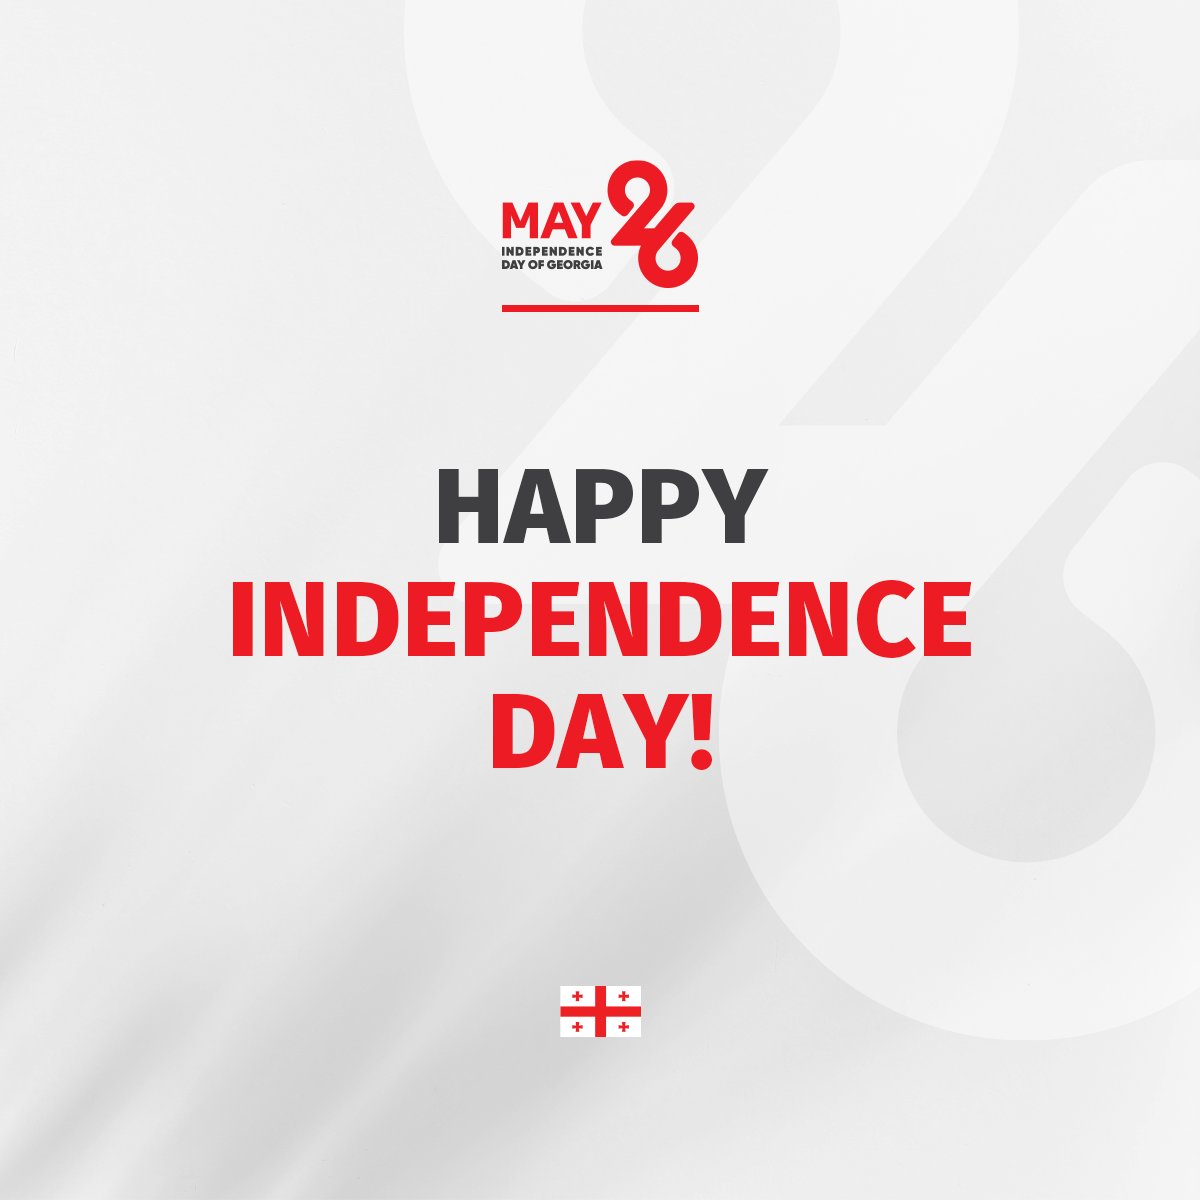 Happy Independence Day to our beautiful country! Free spirit and independence are the main characteristics of the people of Georgia, and today, we celebrate the resilience and rich heritage of our great nation! May freedom of Georgia continue to flourish! 🇬🇪